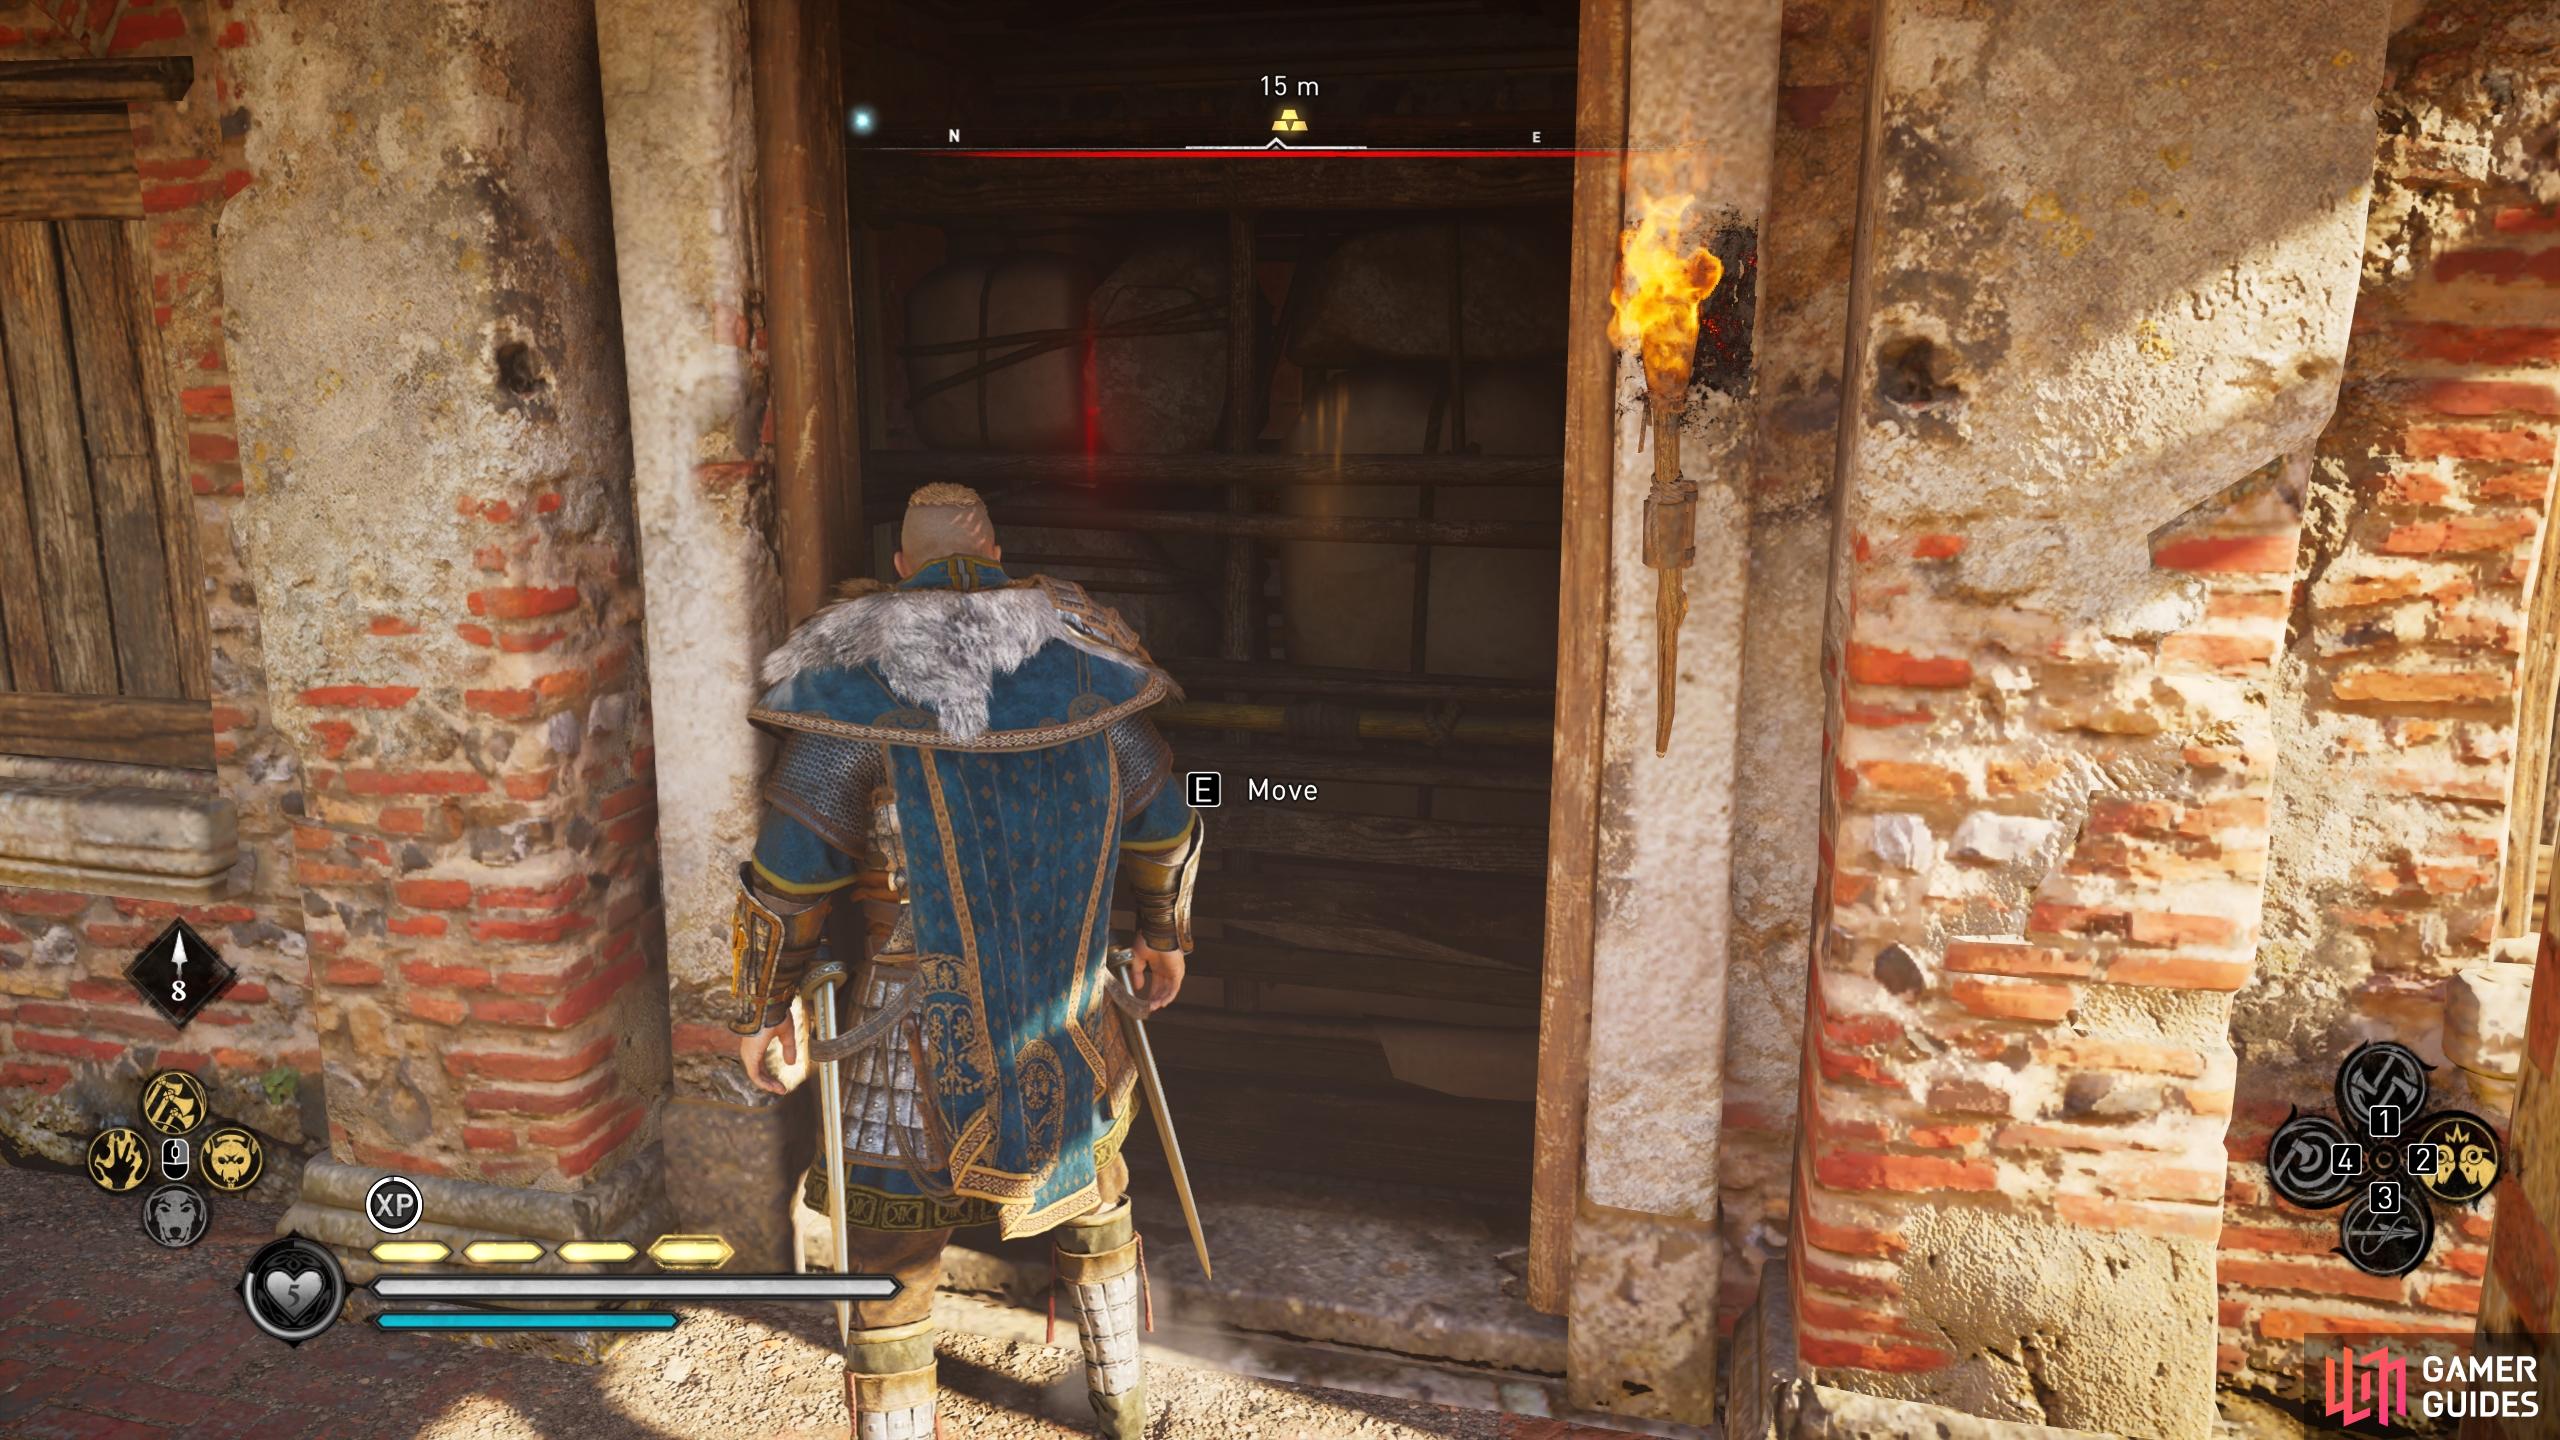 You can push the barricade inward once youve destroyed the pots and boxes on the other side.